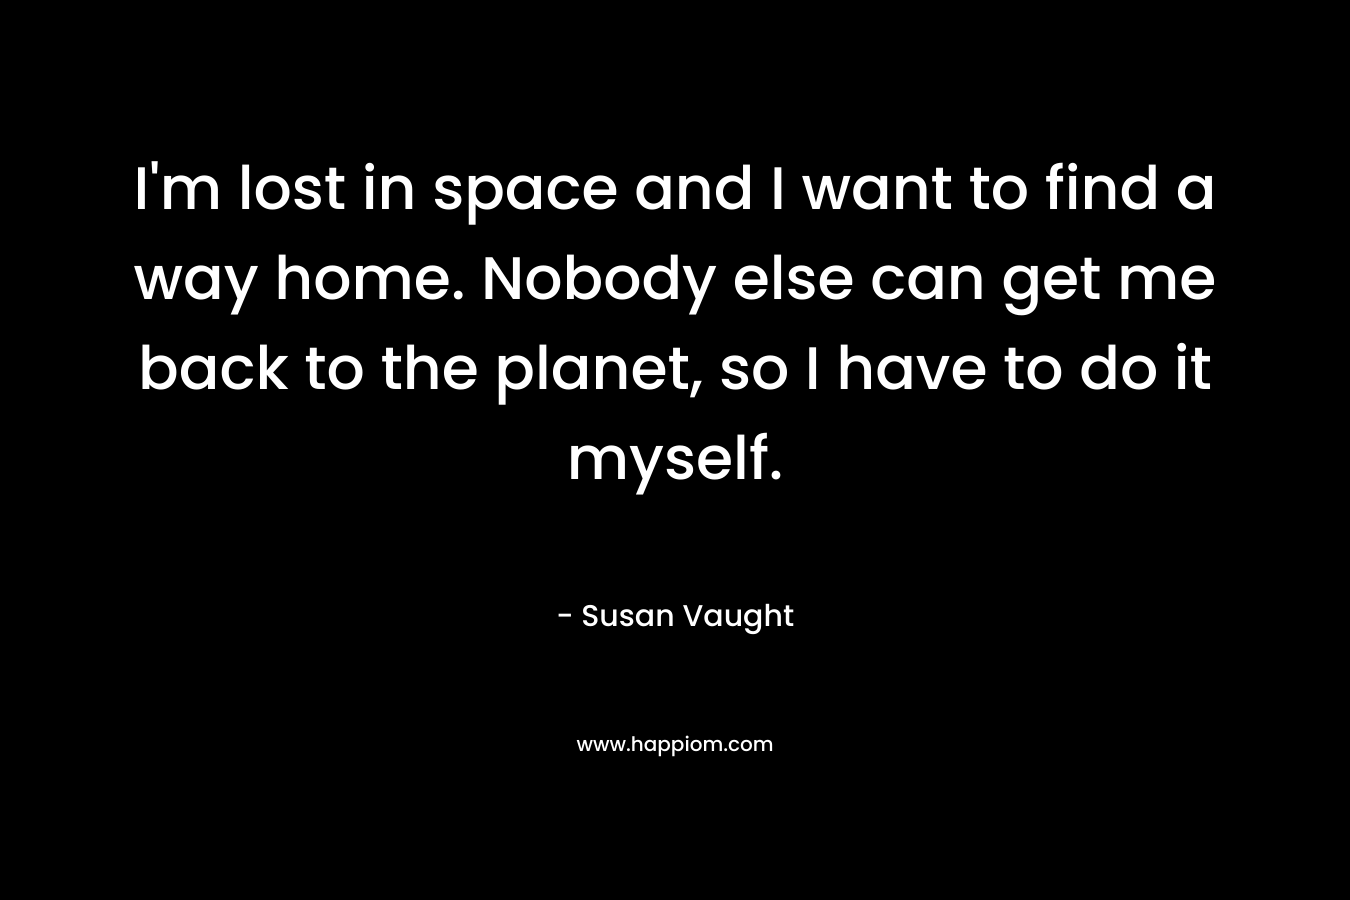 I'm lost in space and I want to find a way home. Nobody else can get me back to the planet, so I have to do it myself.